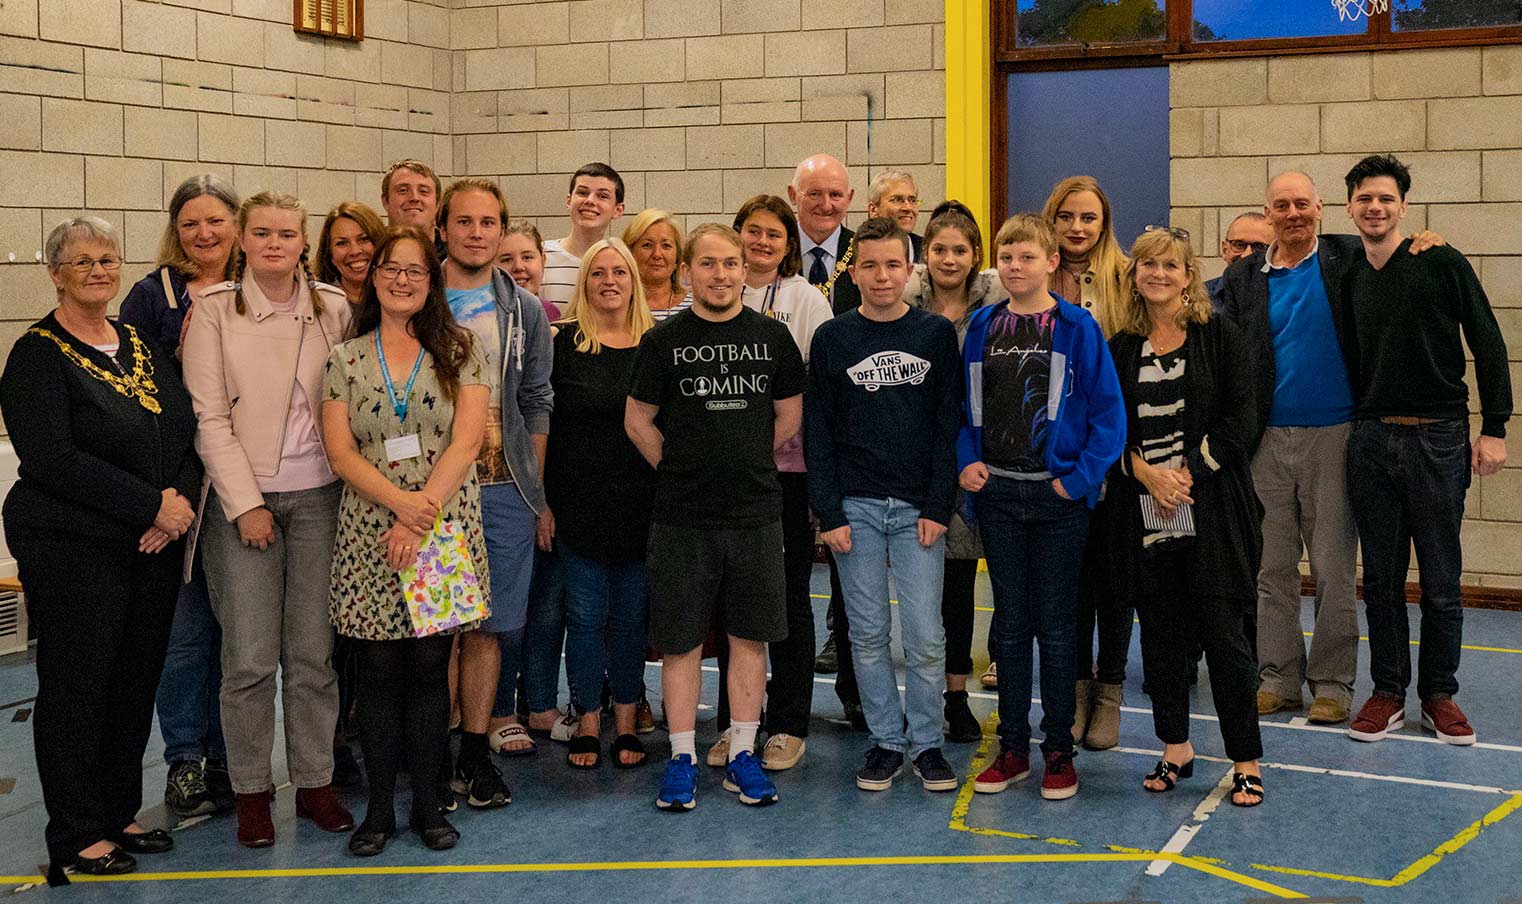 Group photo with The Mayor of Harrogate, Cllr Stuart Martin MBE and Mayoress with volunteers and past and current members of the youth club